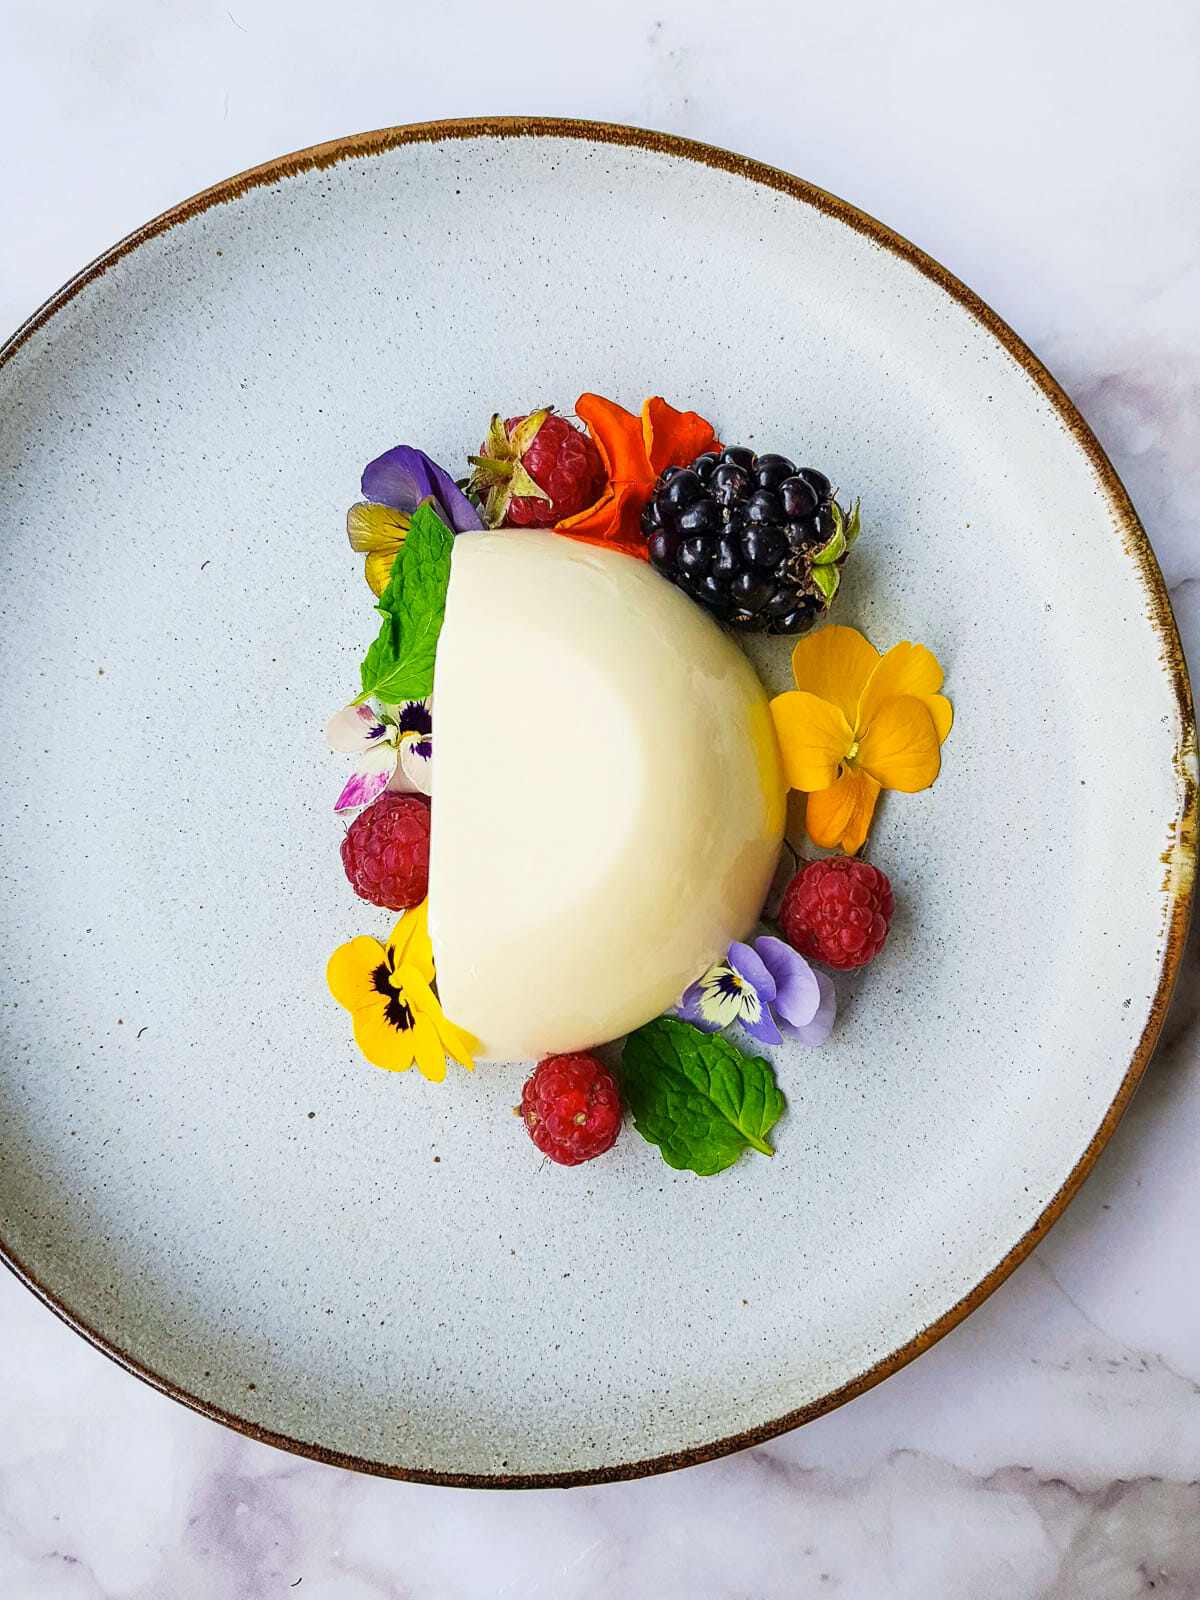 half of cream coconut panna cotta put on a plate and decorate with fresh fruit, edible flowers and mints